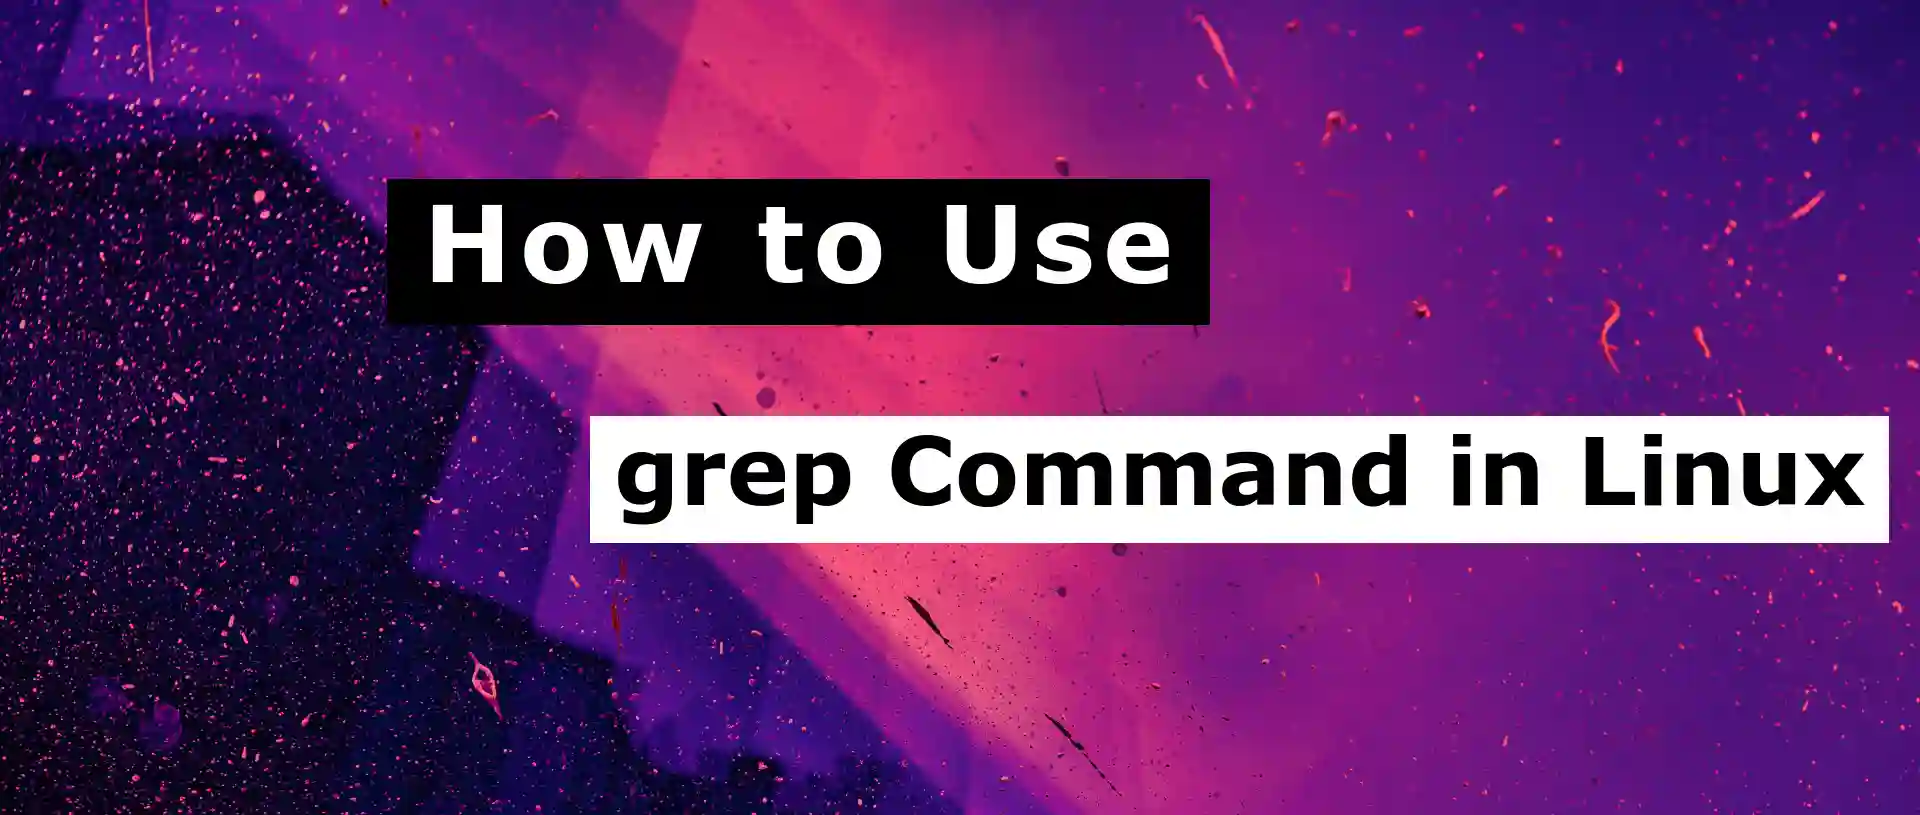 How to Use the grep Command in Linux with Examples - vetechno